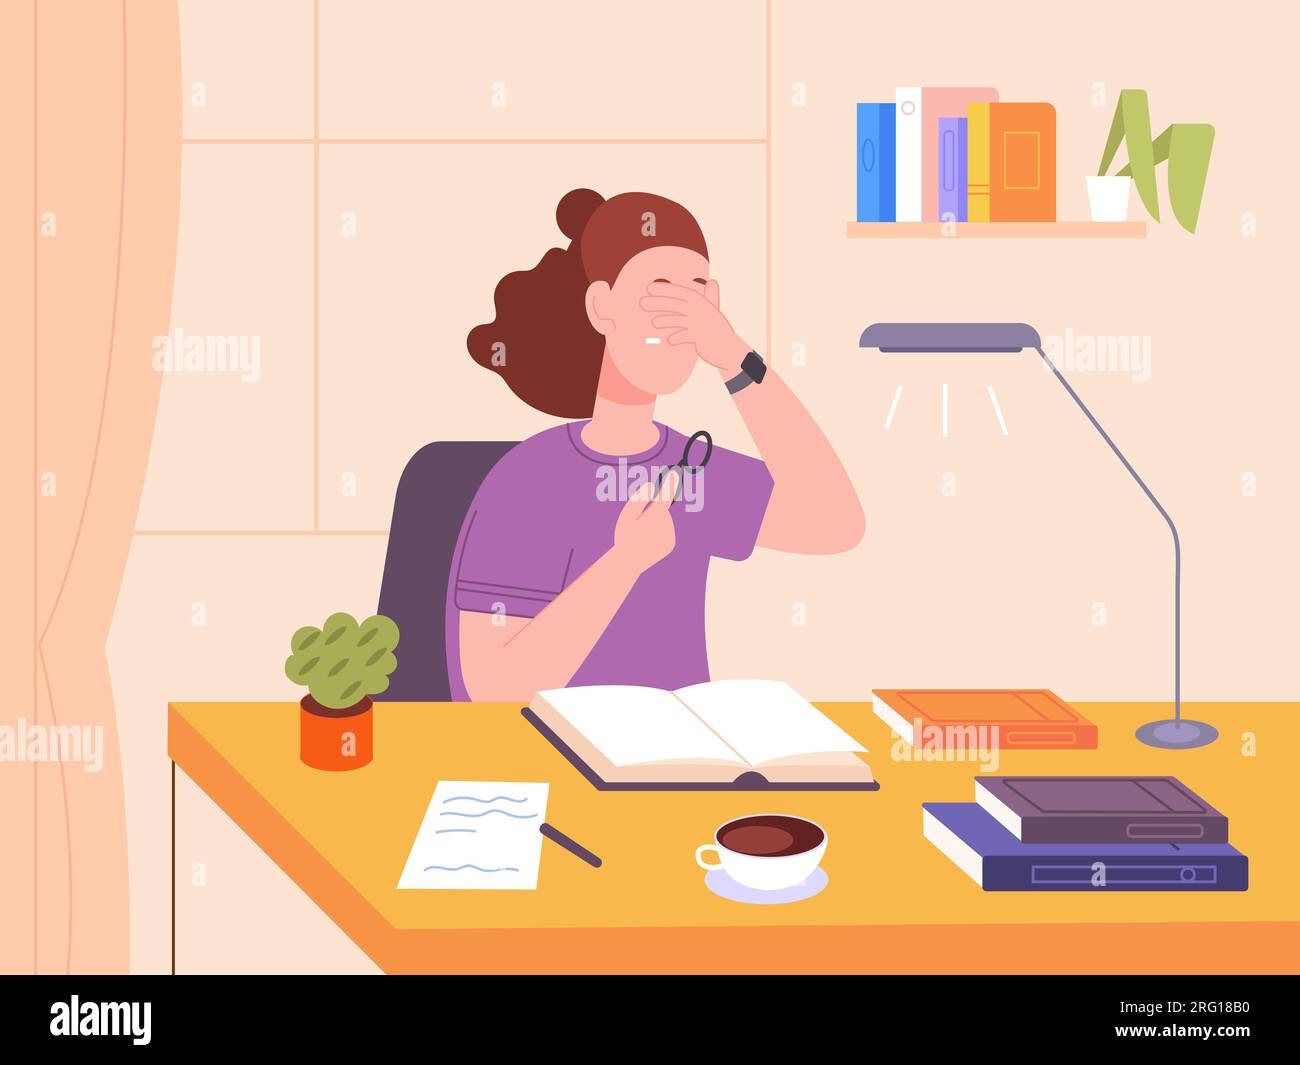 Tired reading. Bored or sad student girl with strain eyes after read books before university test or overwhelmed study work in office, adhd problems concept vector illustration of tired student Stock Vector